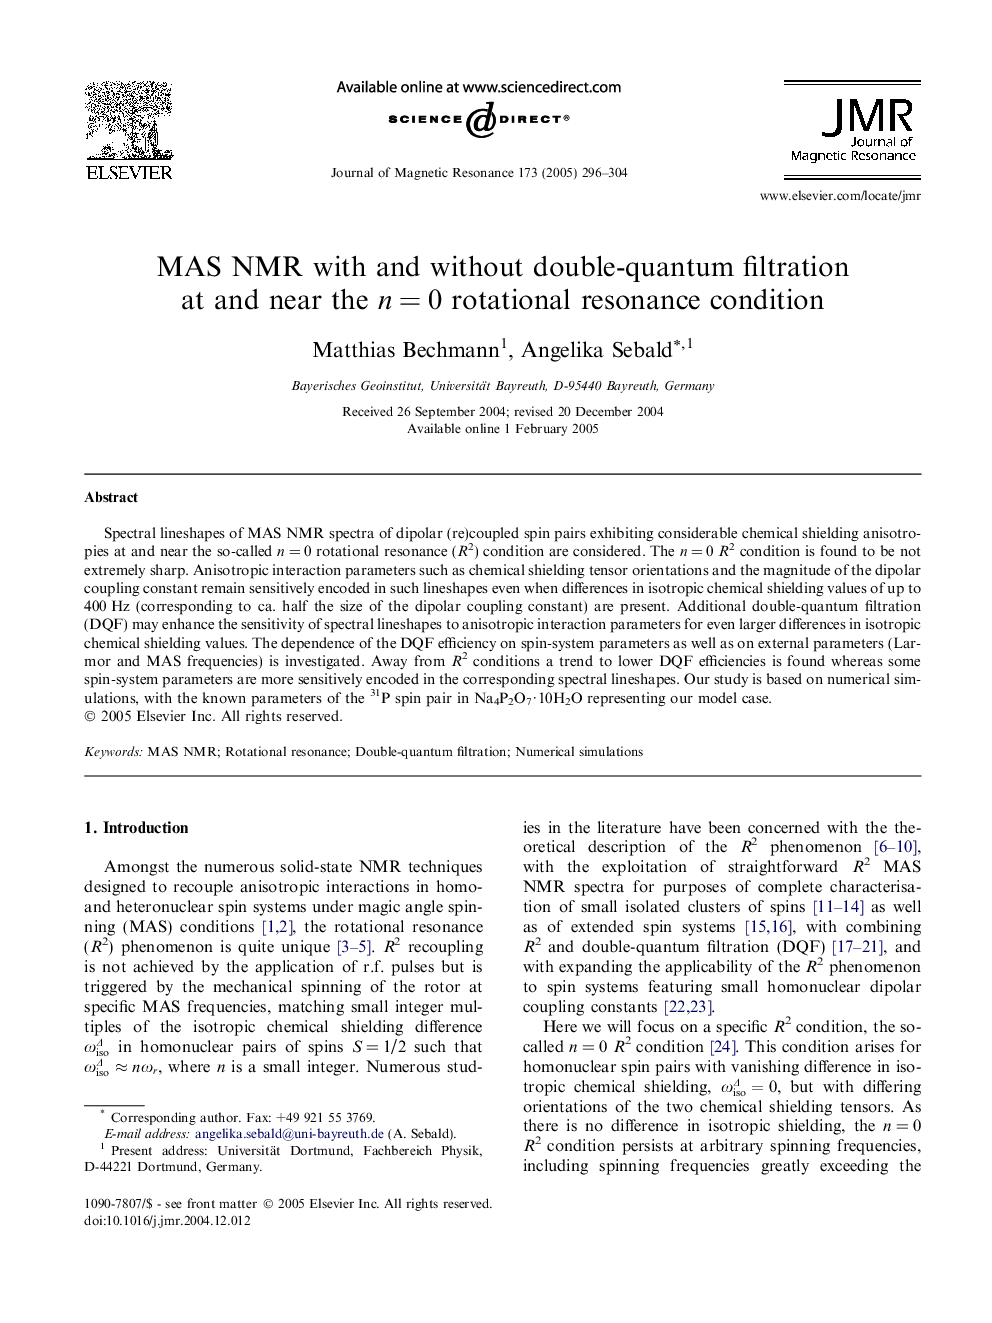 MAS NMR with and without double-quantum filtration at and near the nÂ =Â 0 rotational resonance condition